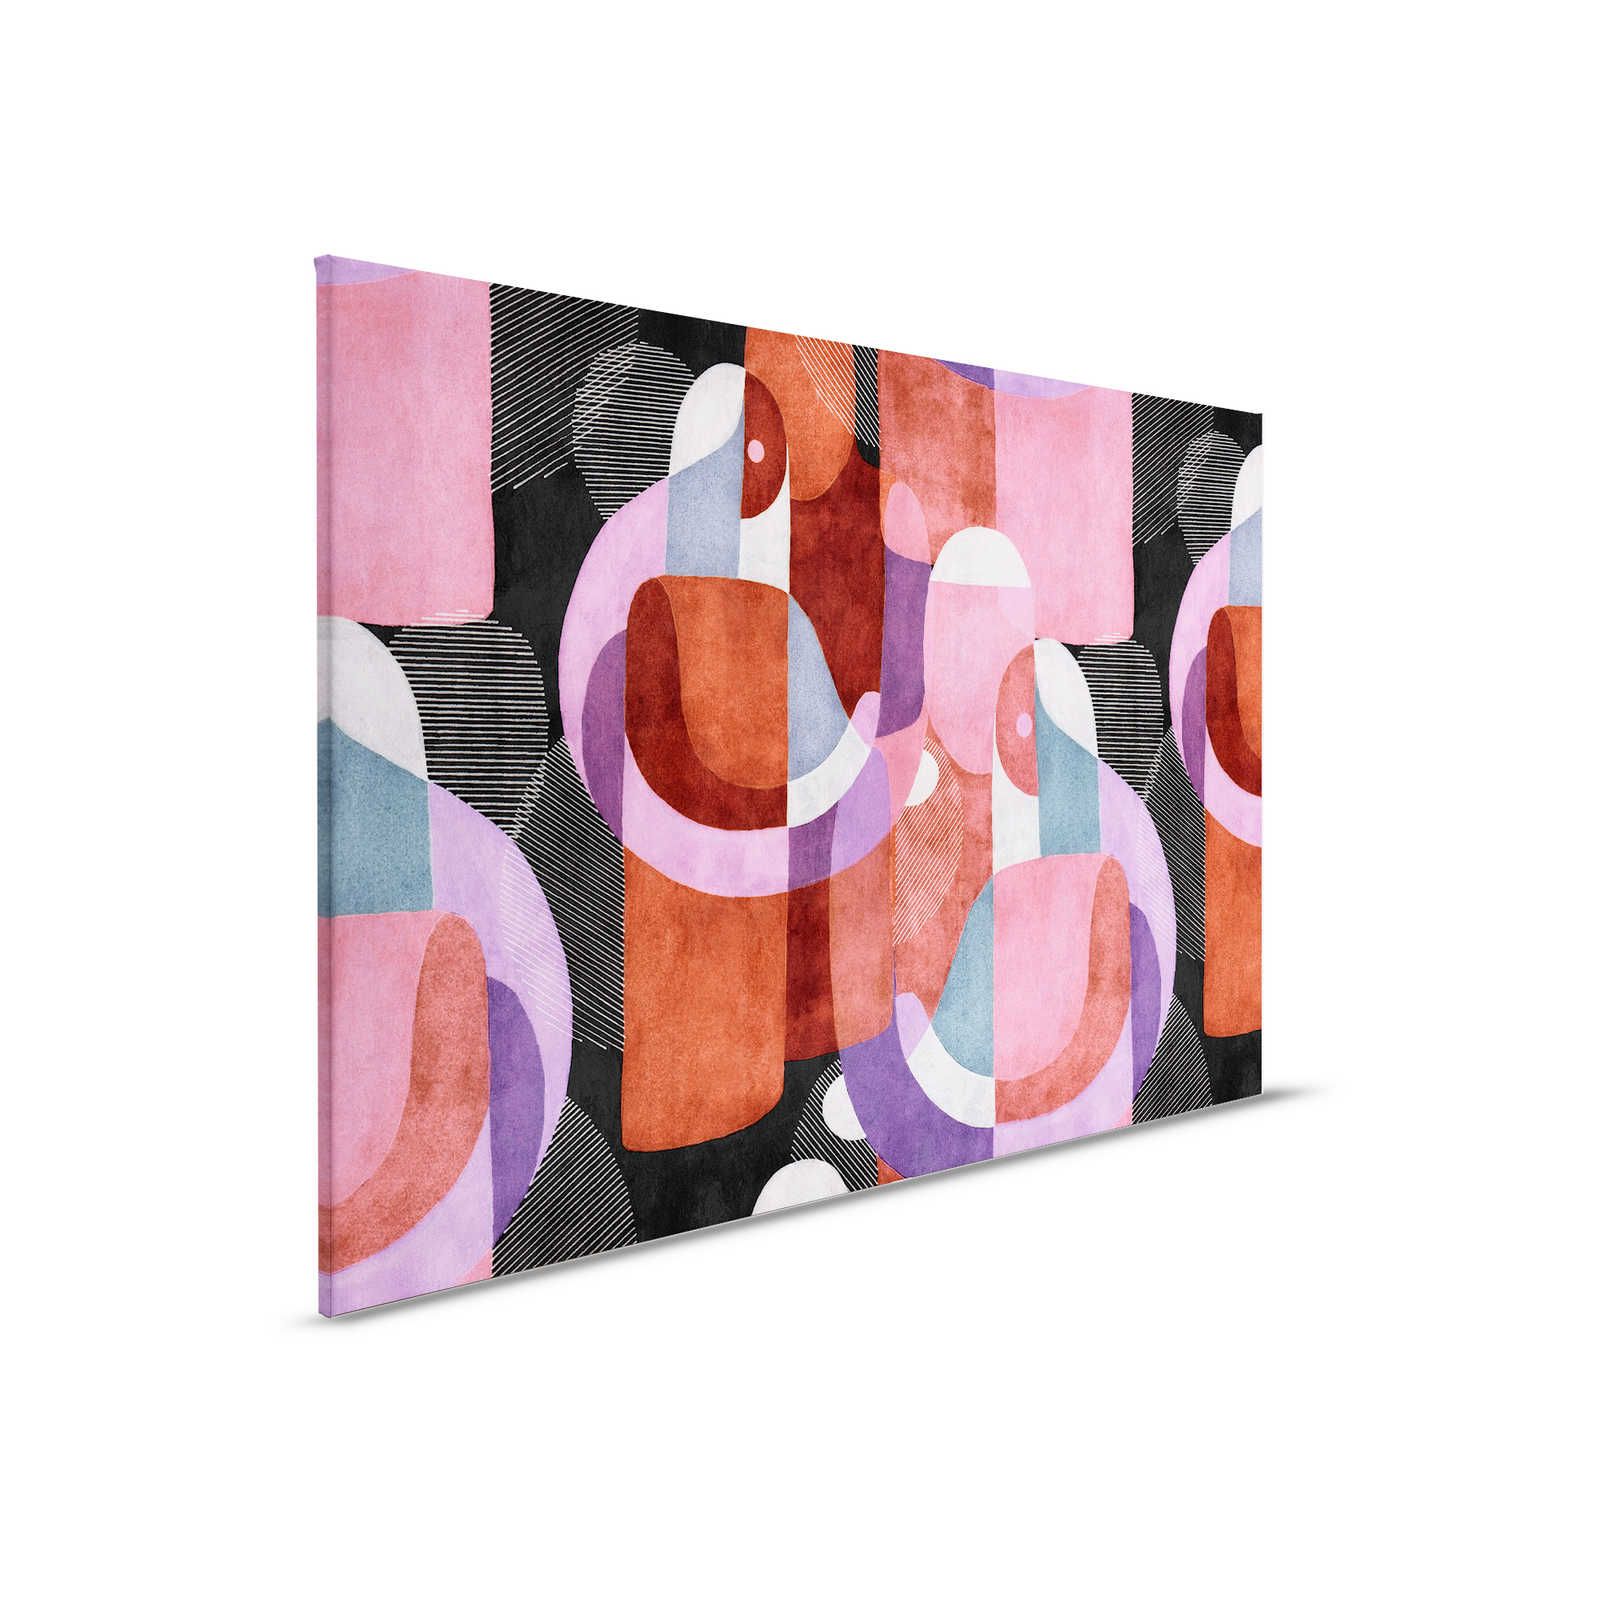         Meeting Place 2 - Canvas painting abstract ethno design in black & pink - 0,90 m x 0,60 m
    